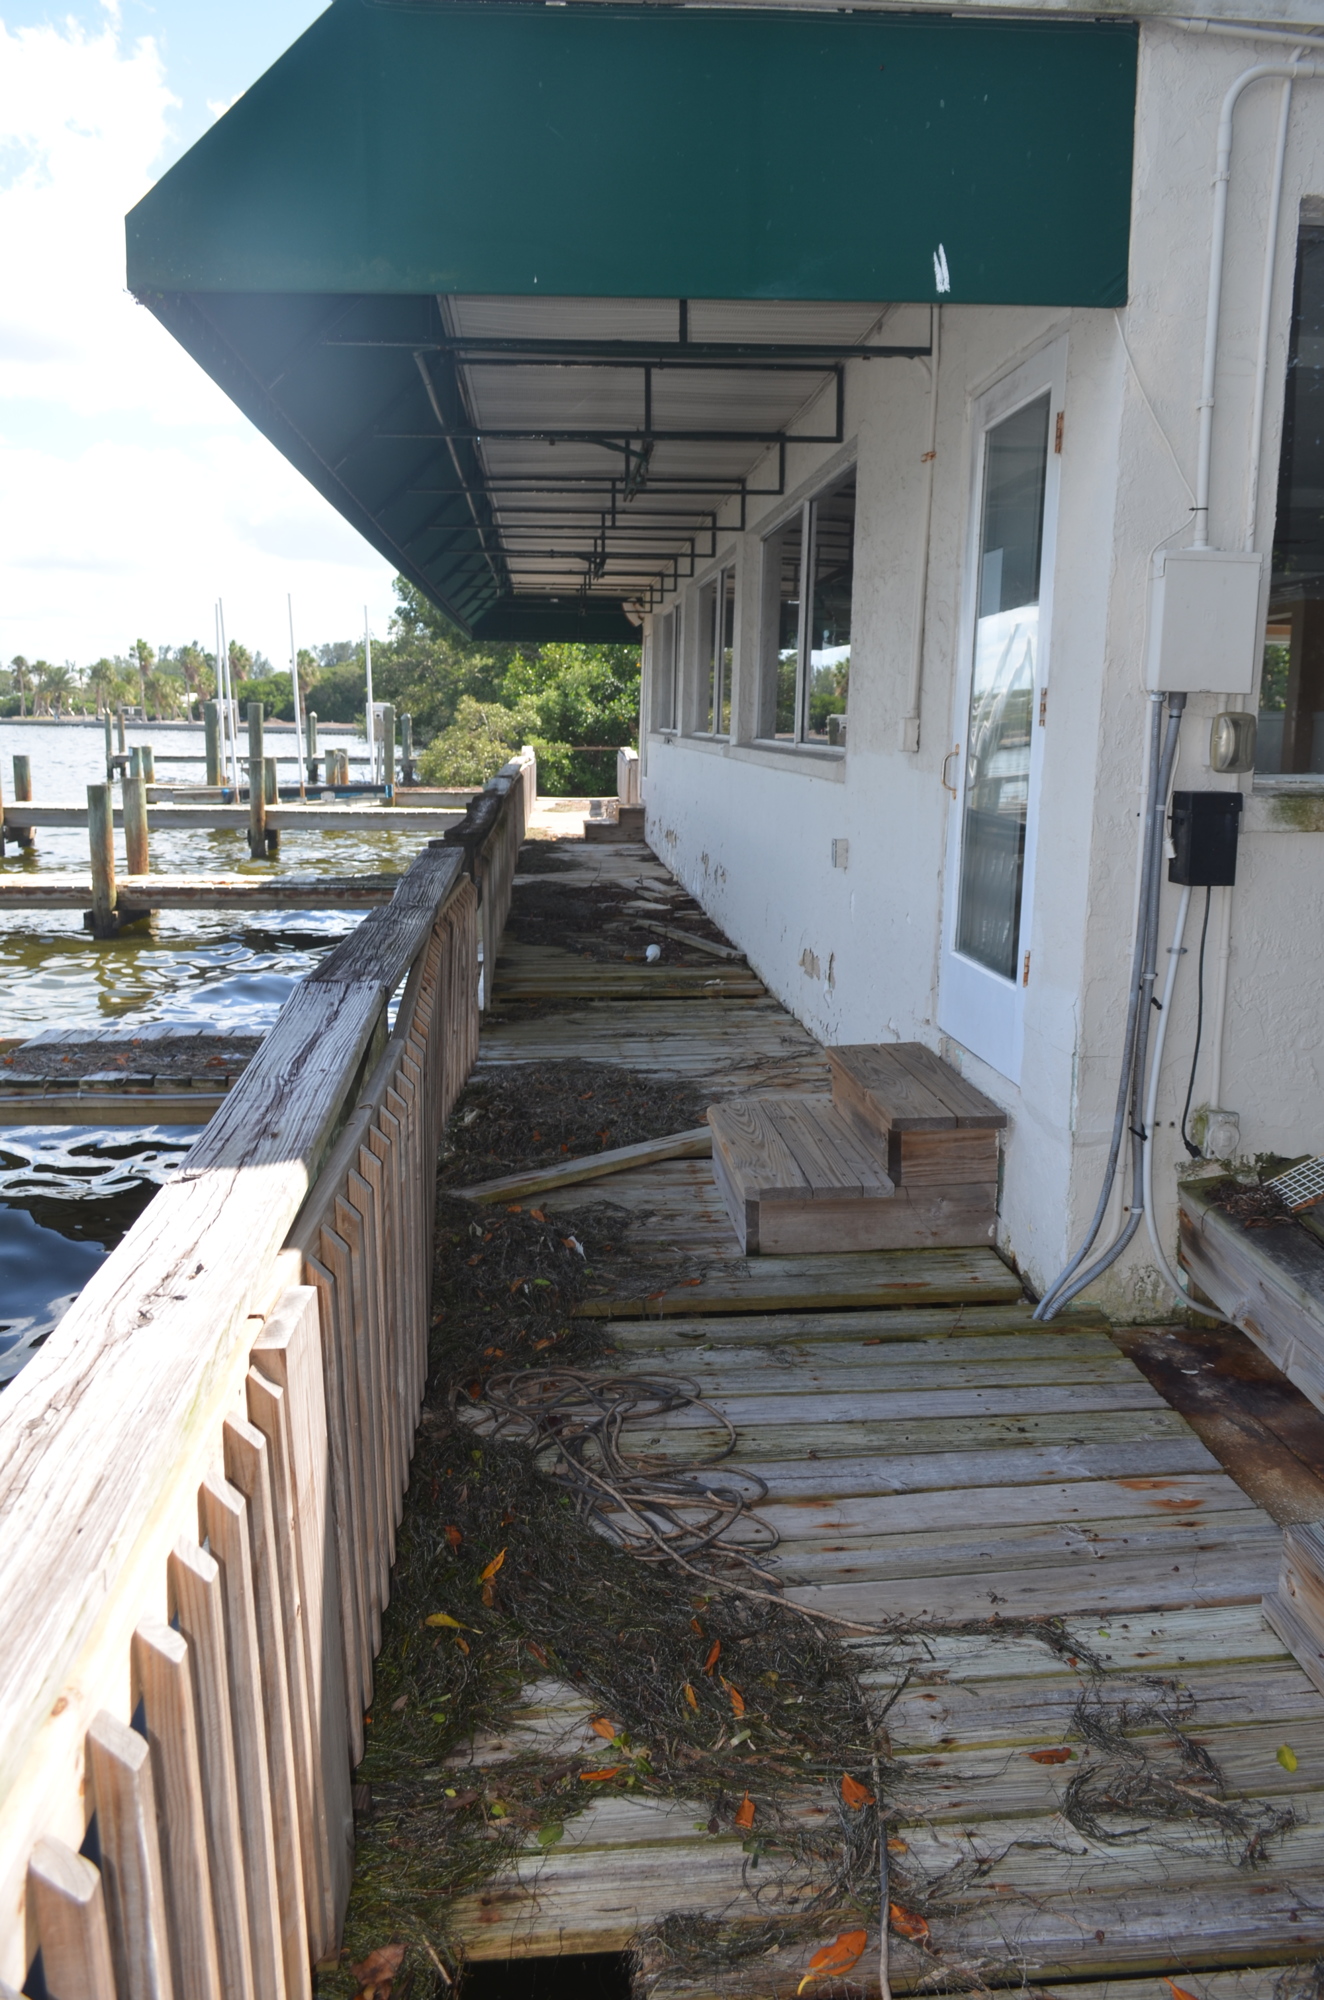 A new restaurant is being developed on old Pattigeorge's Waterfront Restaurant site on Longboat Key. The waterfront, shown, of the old eatery is weathered. Terry O'Connor